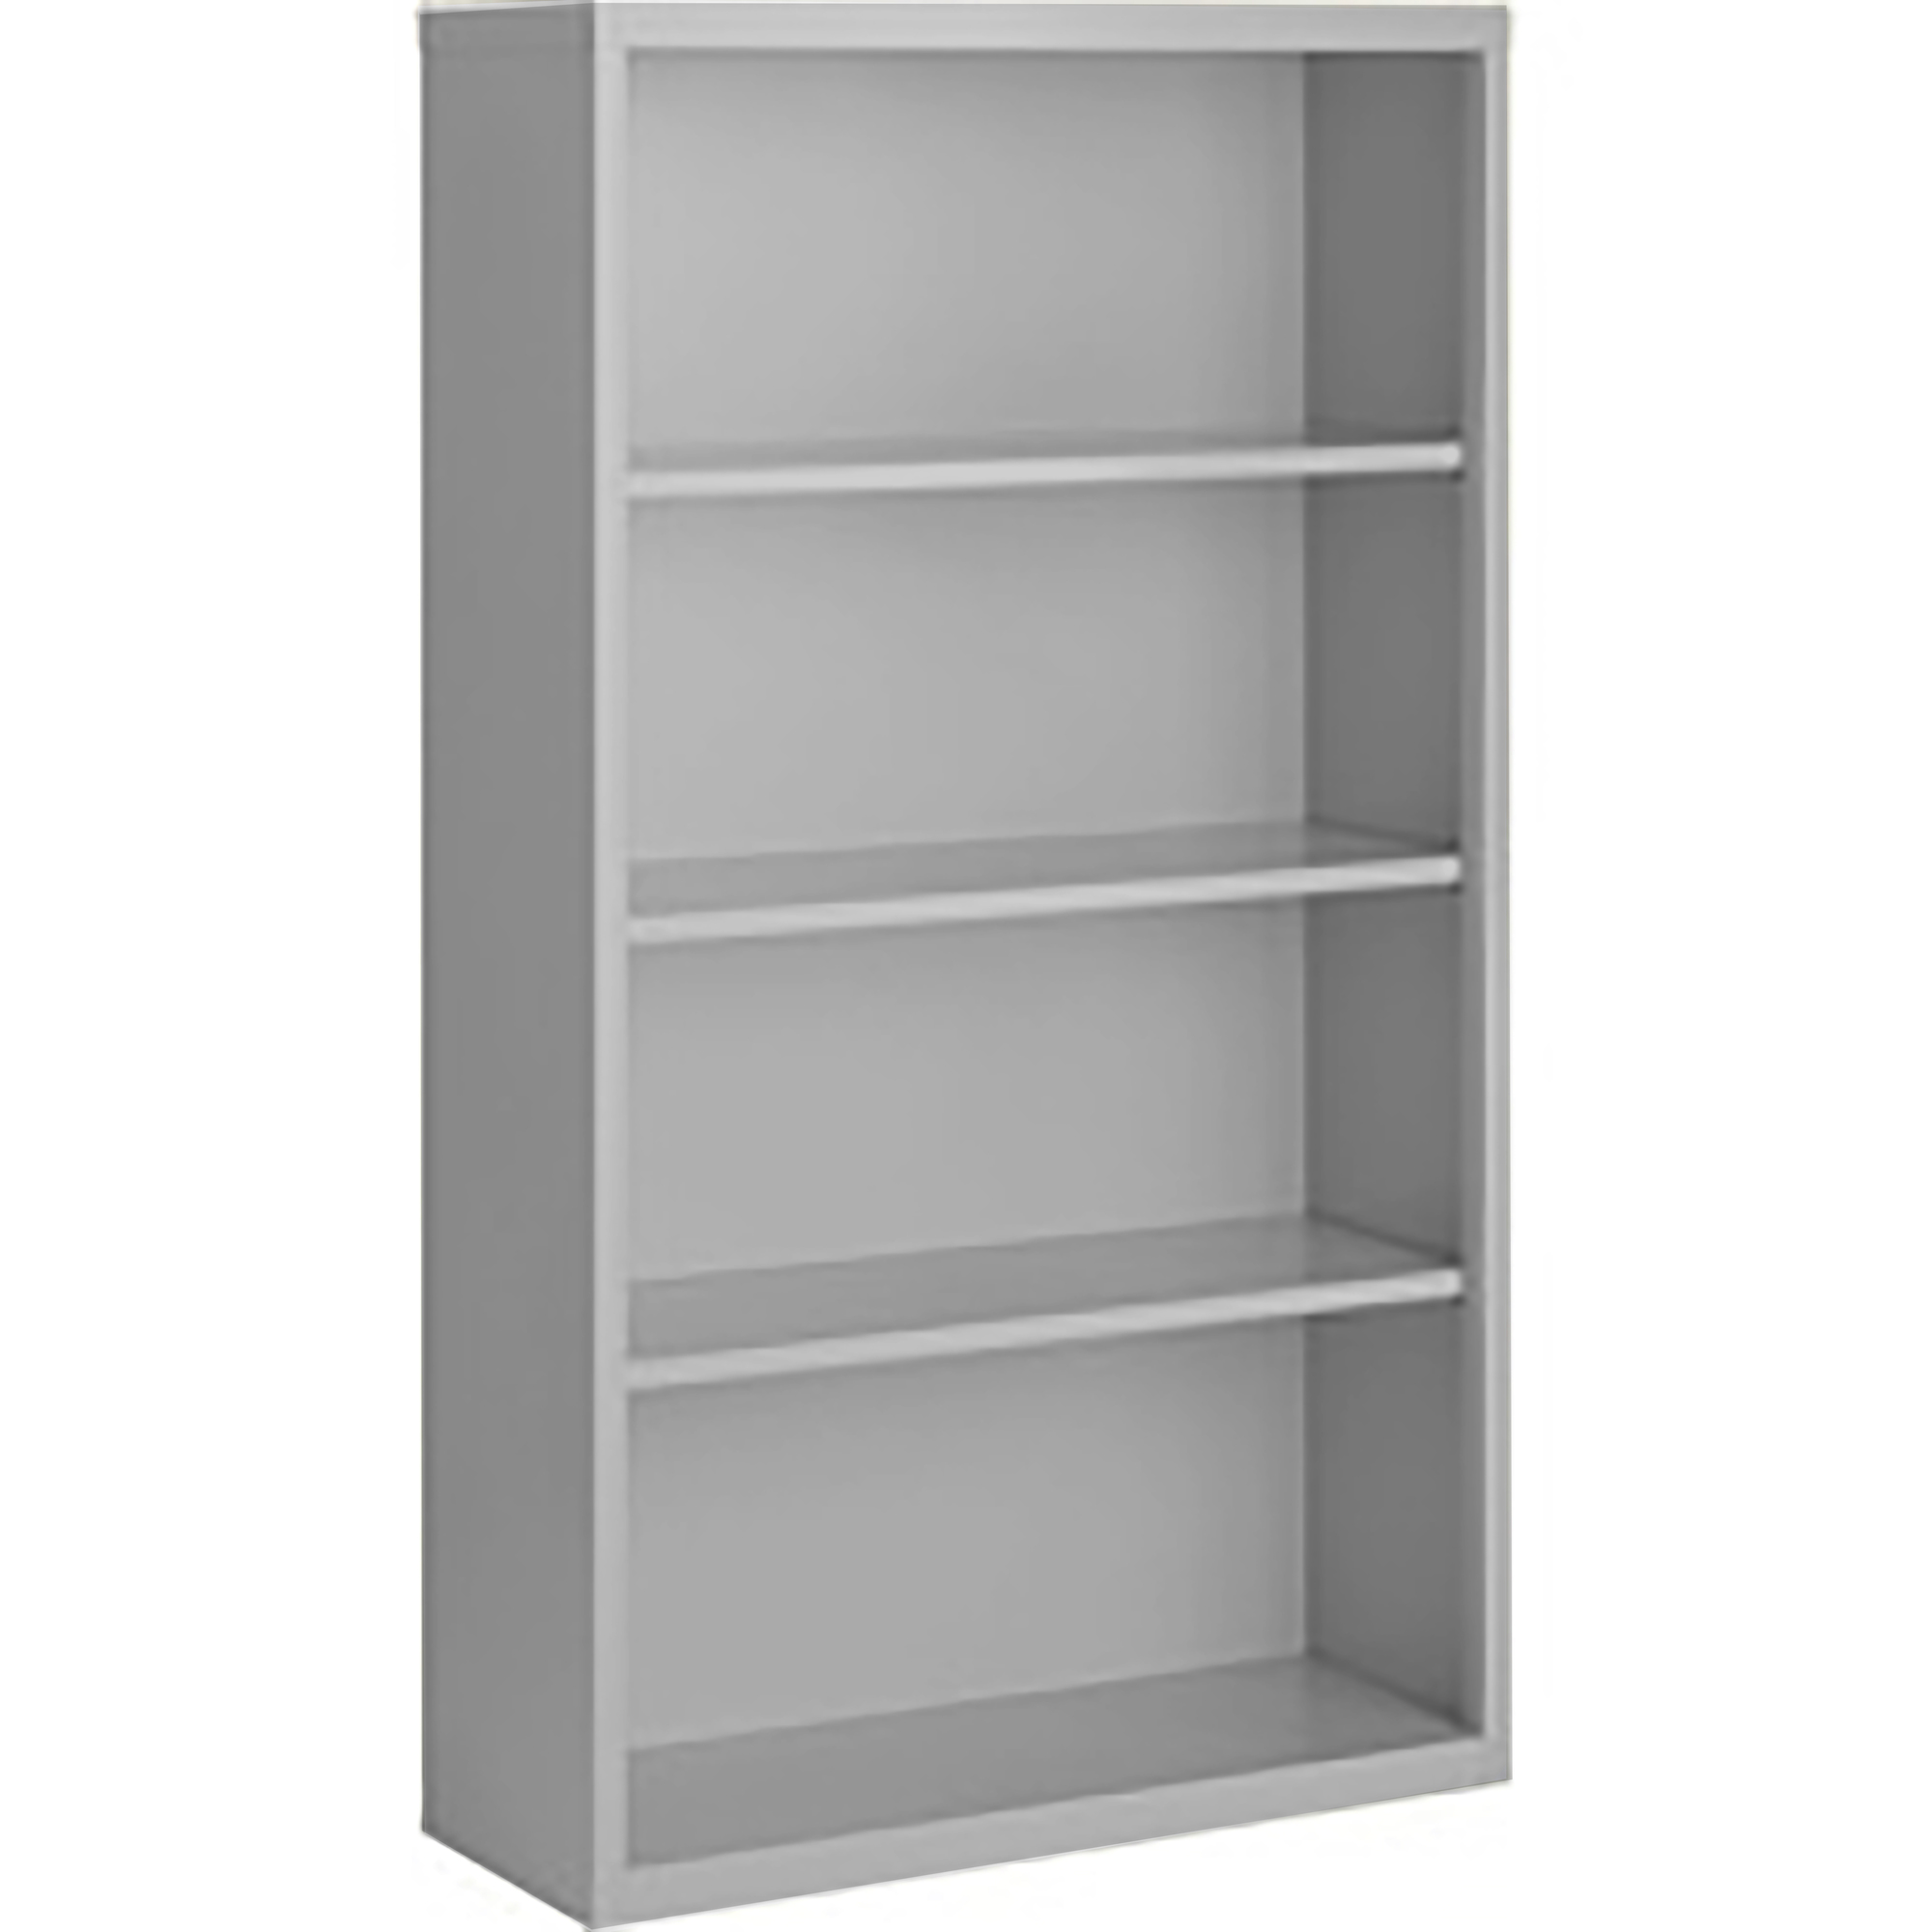 Steel Cabinets USA, 36Inchx18Inchx52Inch Gray Bookcase Steel Fully Assembled, Height 52 in, Shelves (qty.) 4, Material Steel, Model BCA-365218-G